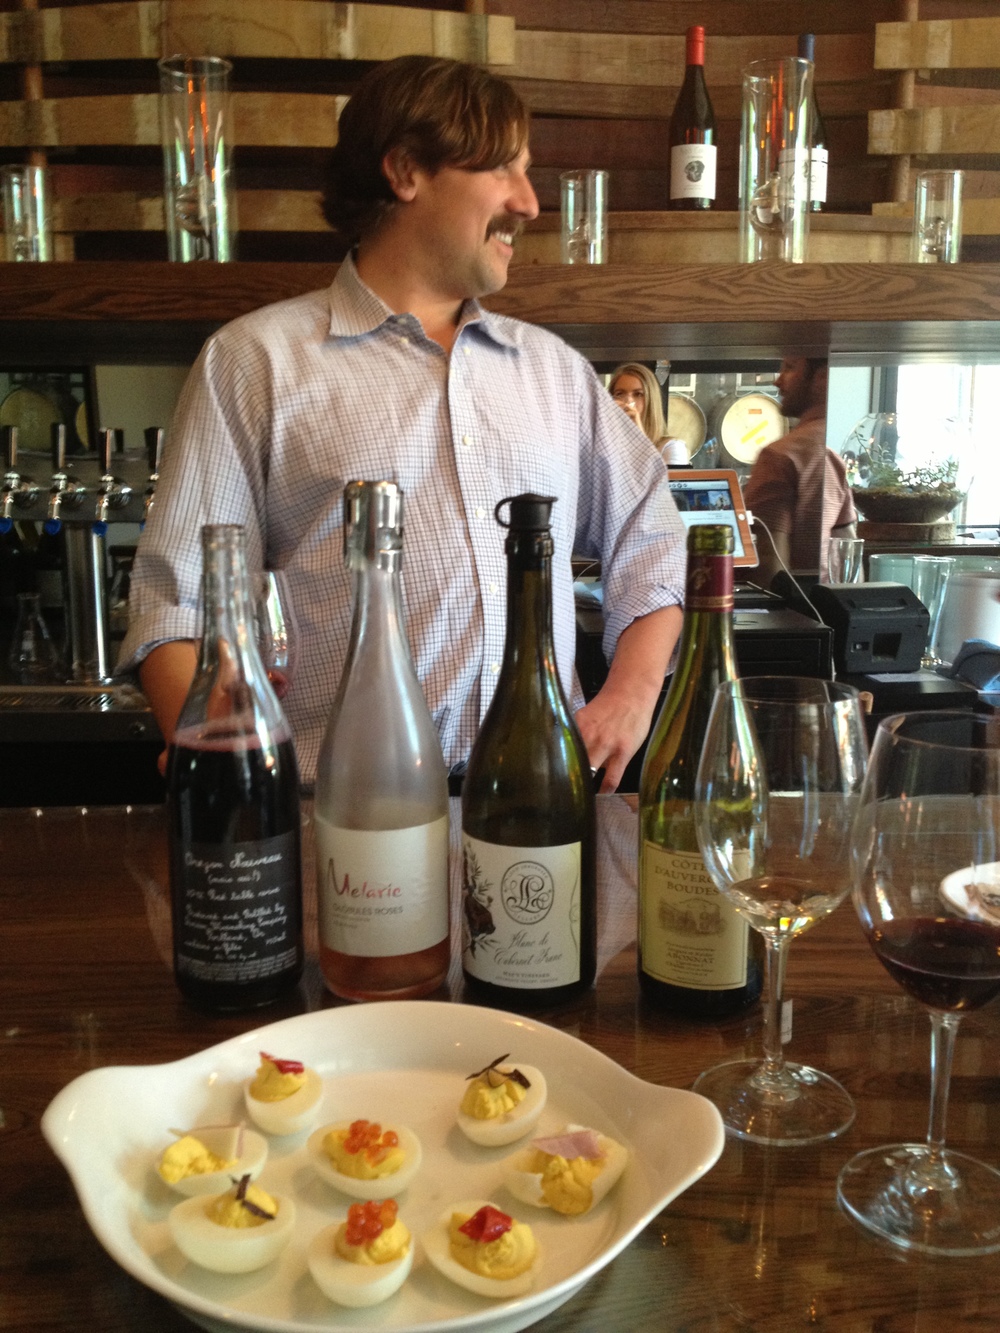  Fun impromptu tasting with Tom, owner of the South East Wine Collective and winemaker of Division Wine Making Company.  